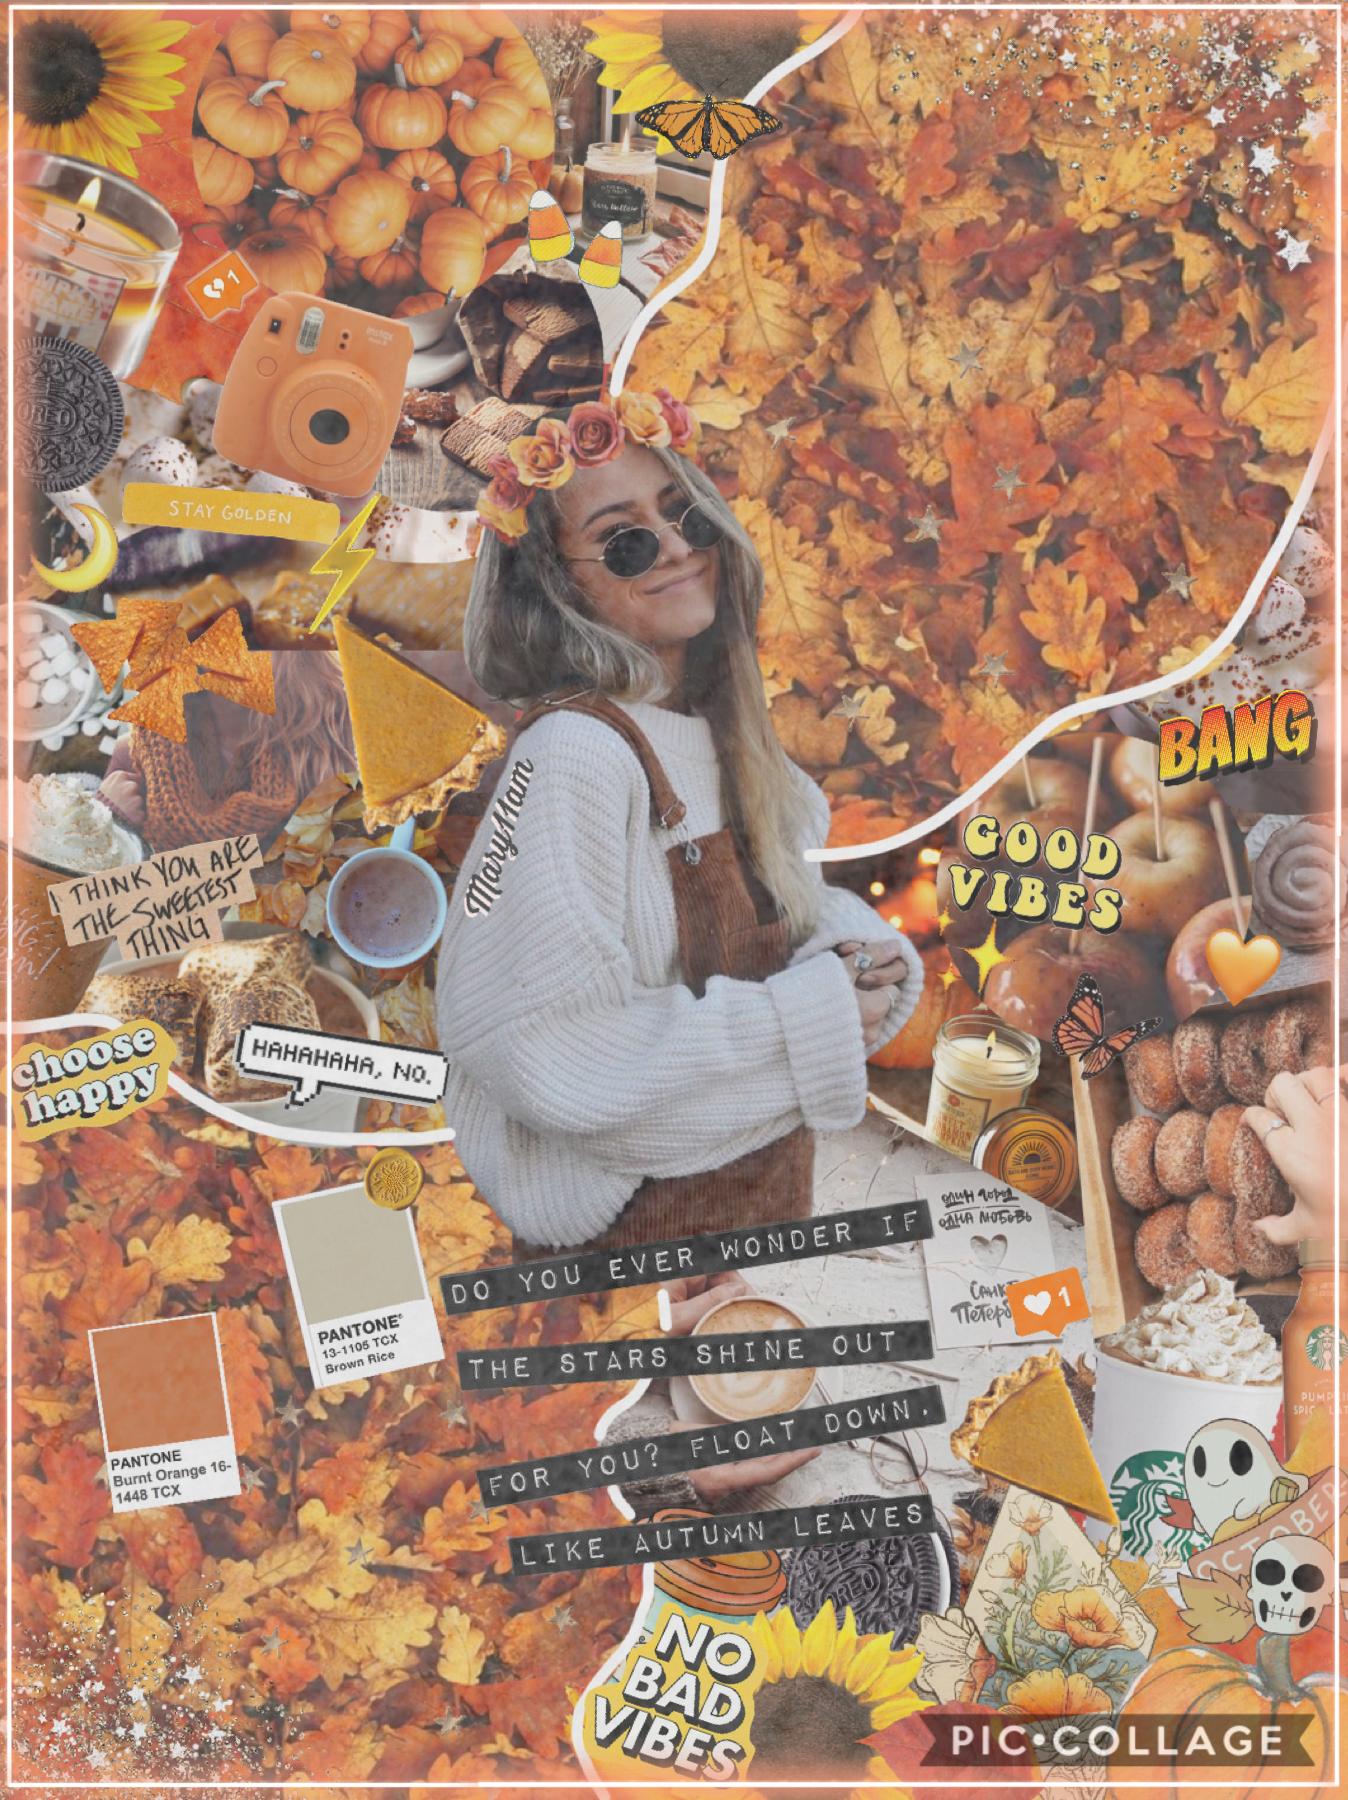 HEYYY! I’m super sorry for being inactive recently.. I’ve been really busy with school, exams, etc.. I hope you all understand ♥️ but I will be back soon with better collages. This is my entry for one of the contests I entered. Love you all, and see you s